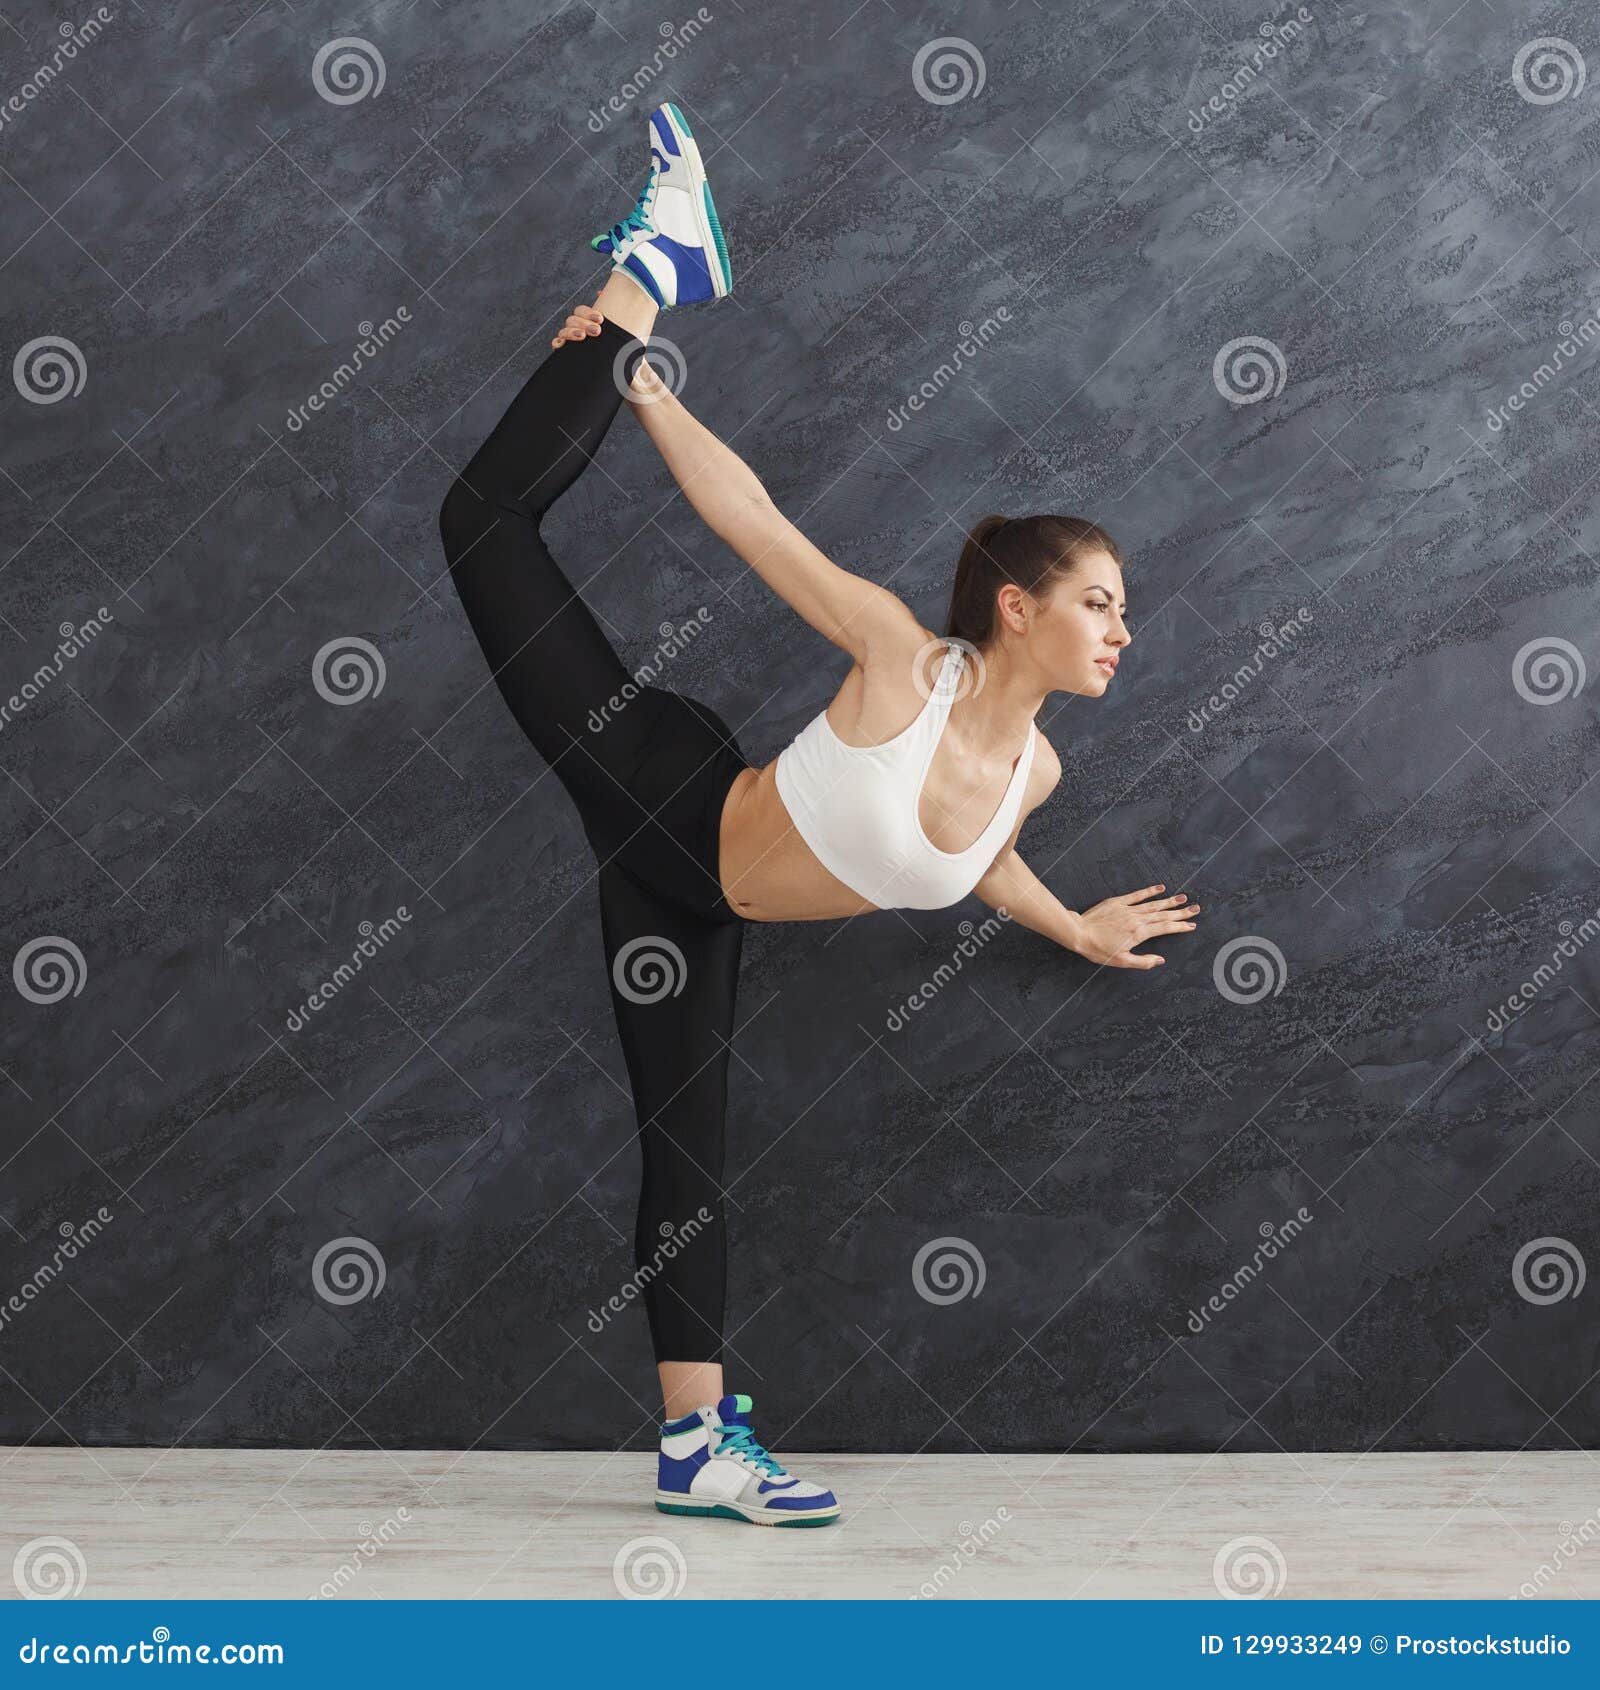 Fitness Woman Stretching at Grey Background Indoors Stock Image - Image ...